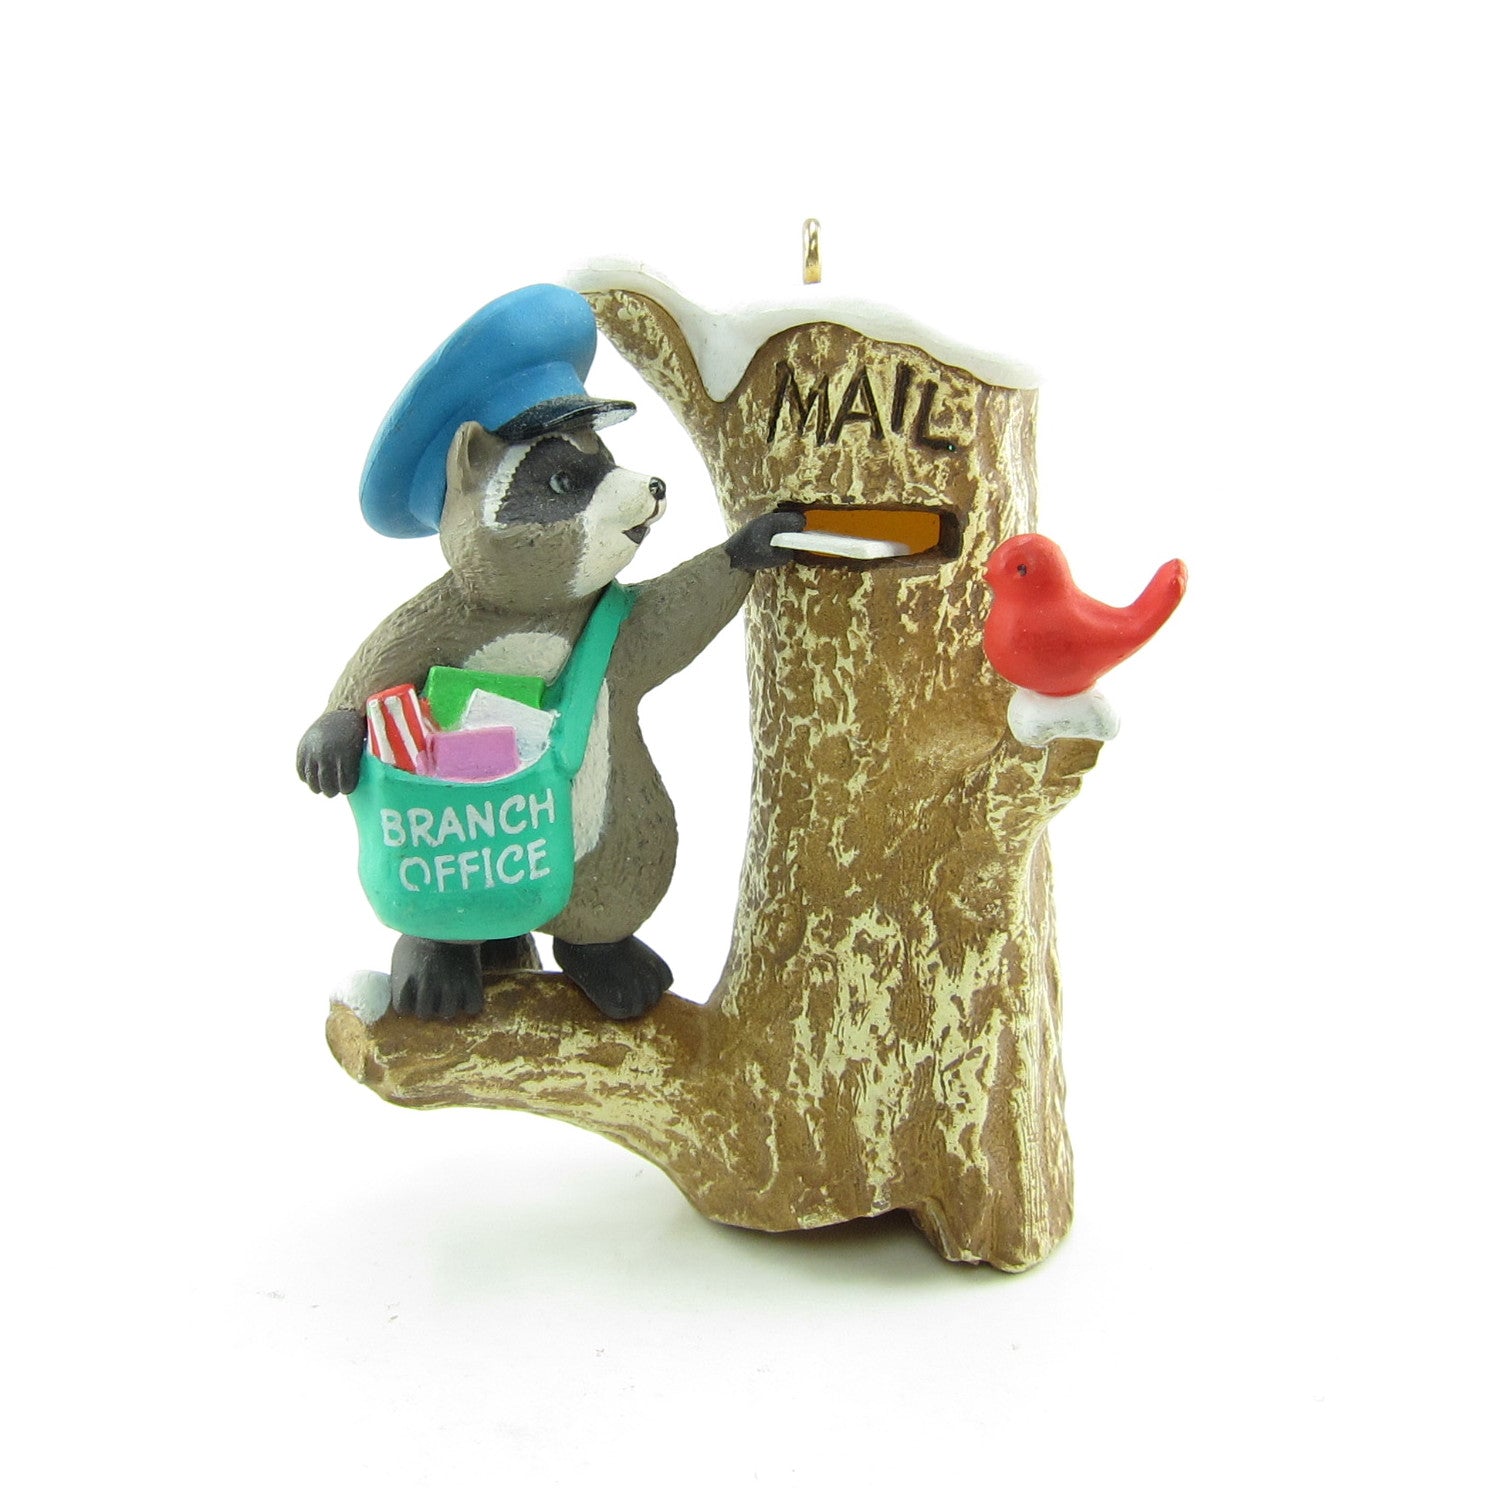 Mail Call Hallmark ornament with raccoon mail carrier and tree stump mailbox